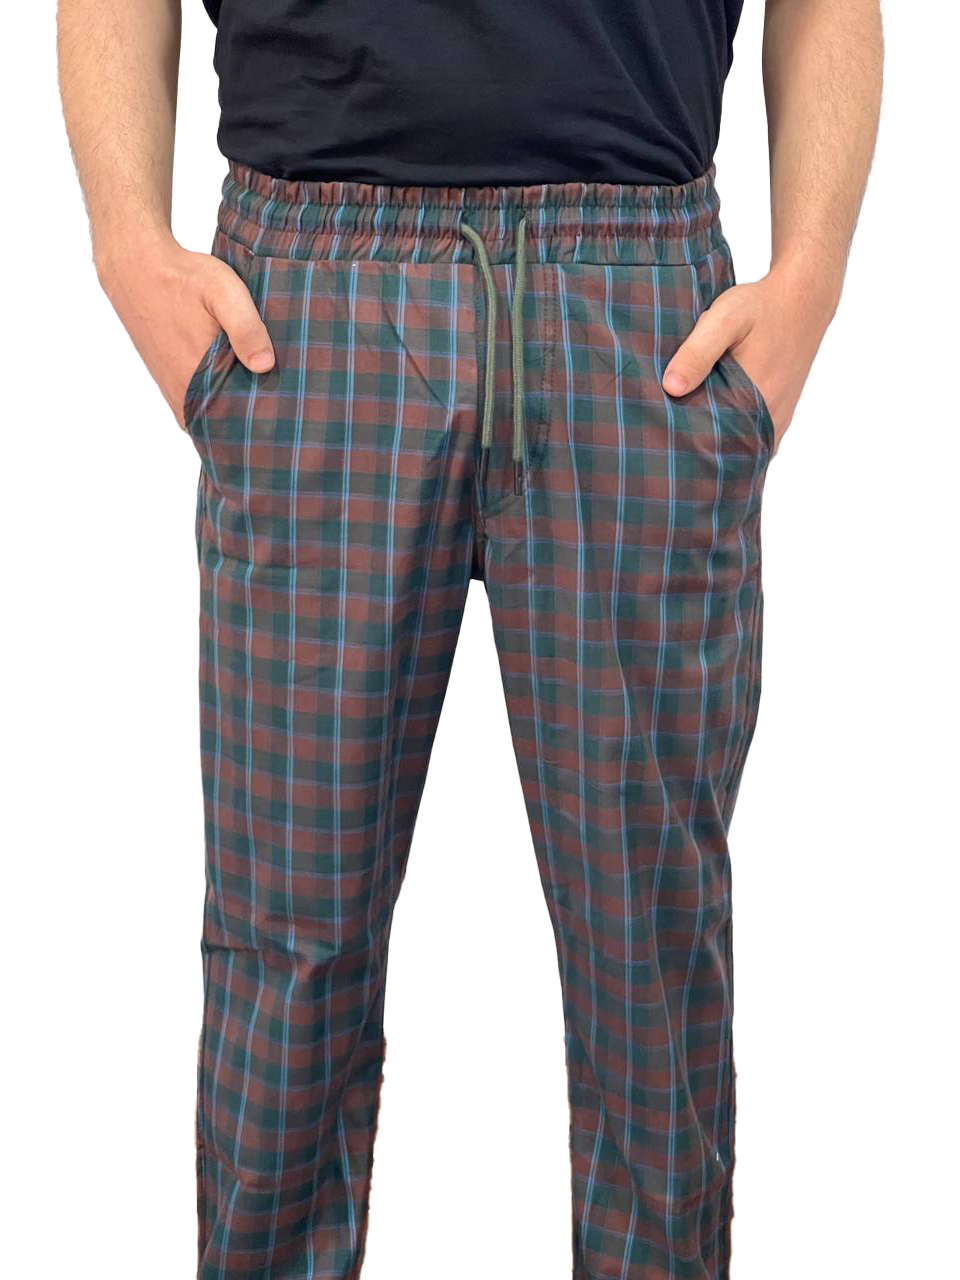 Men's red cotton summer check pants-brown